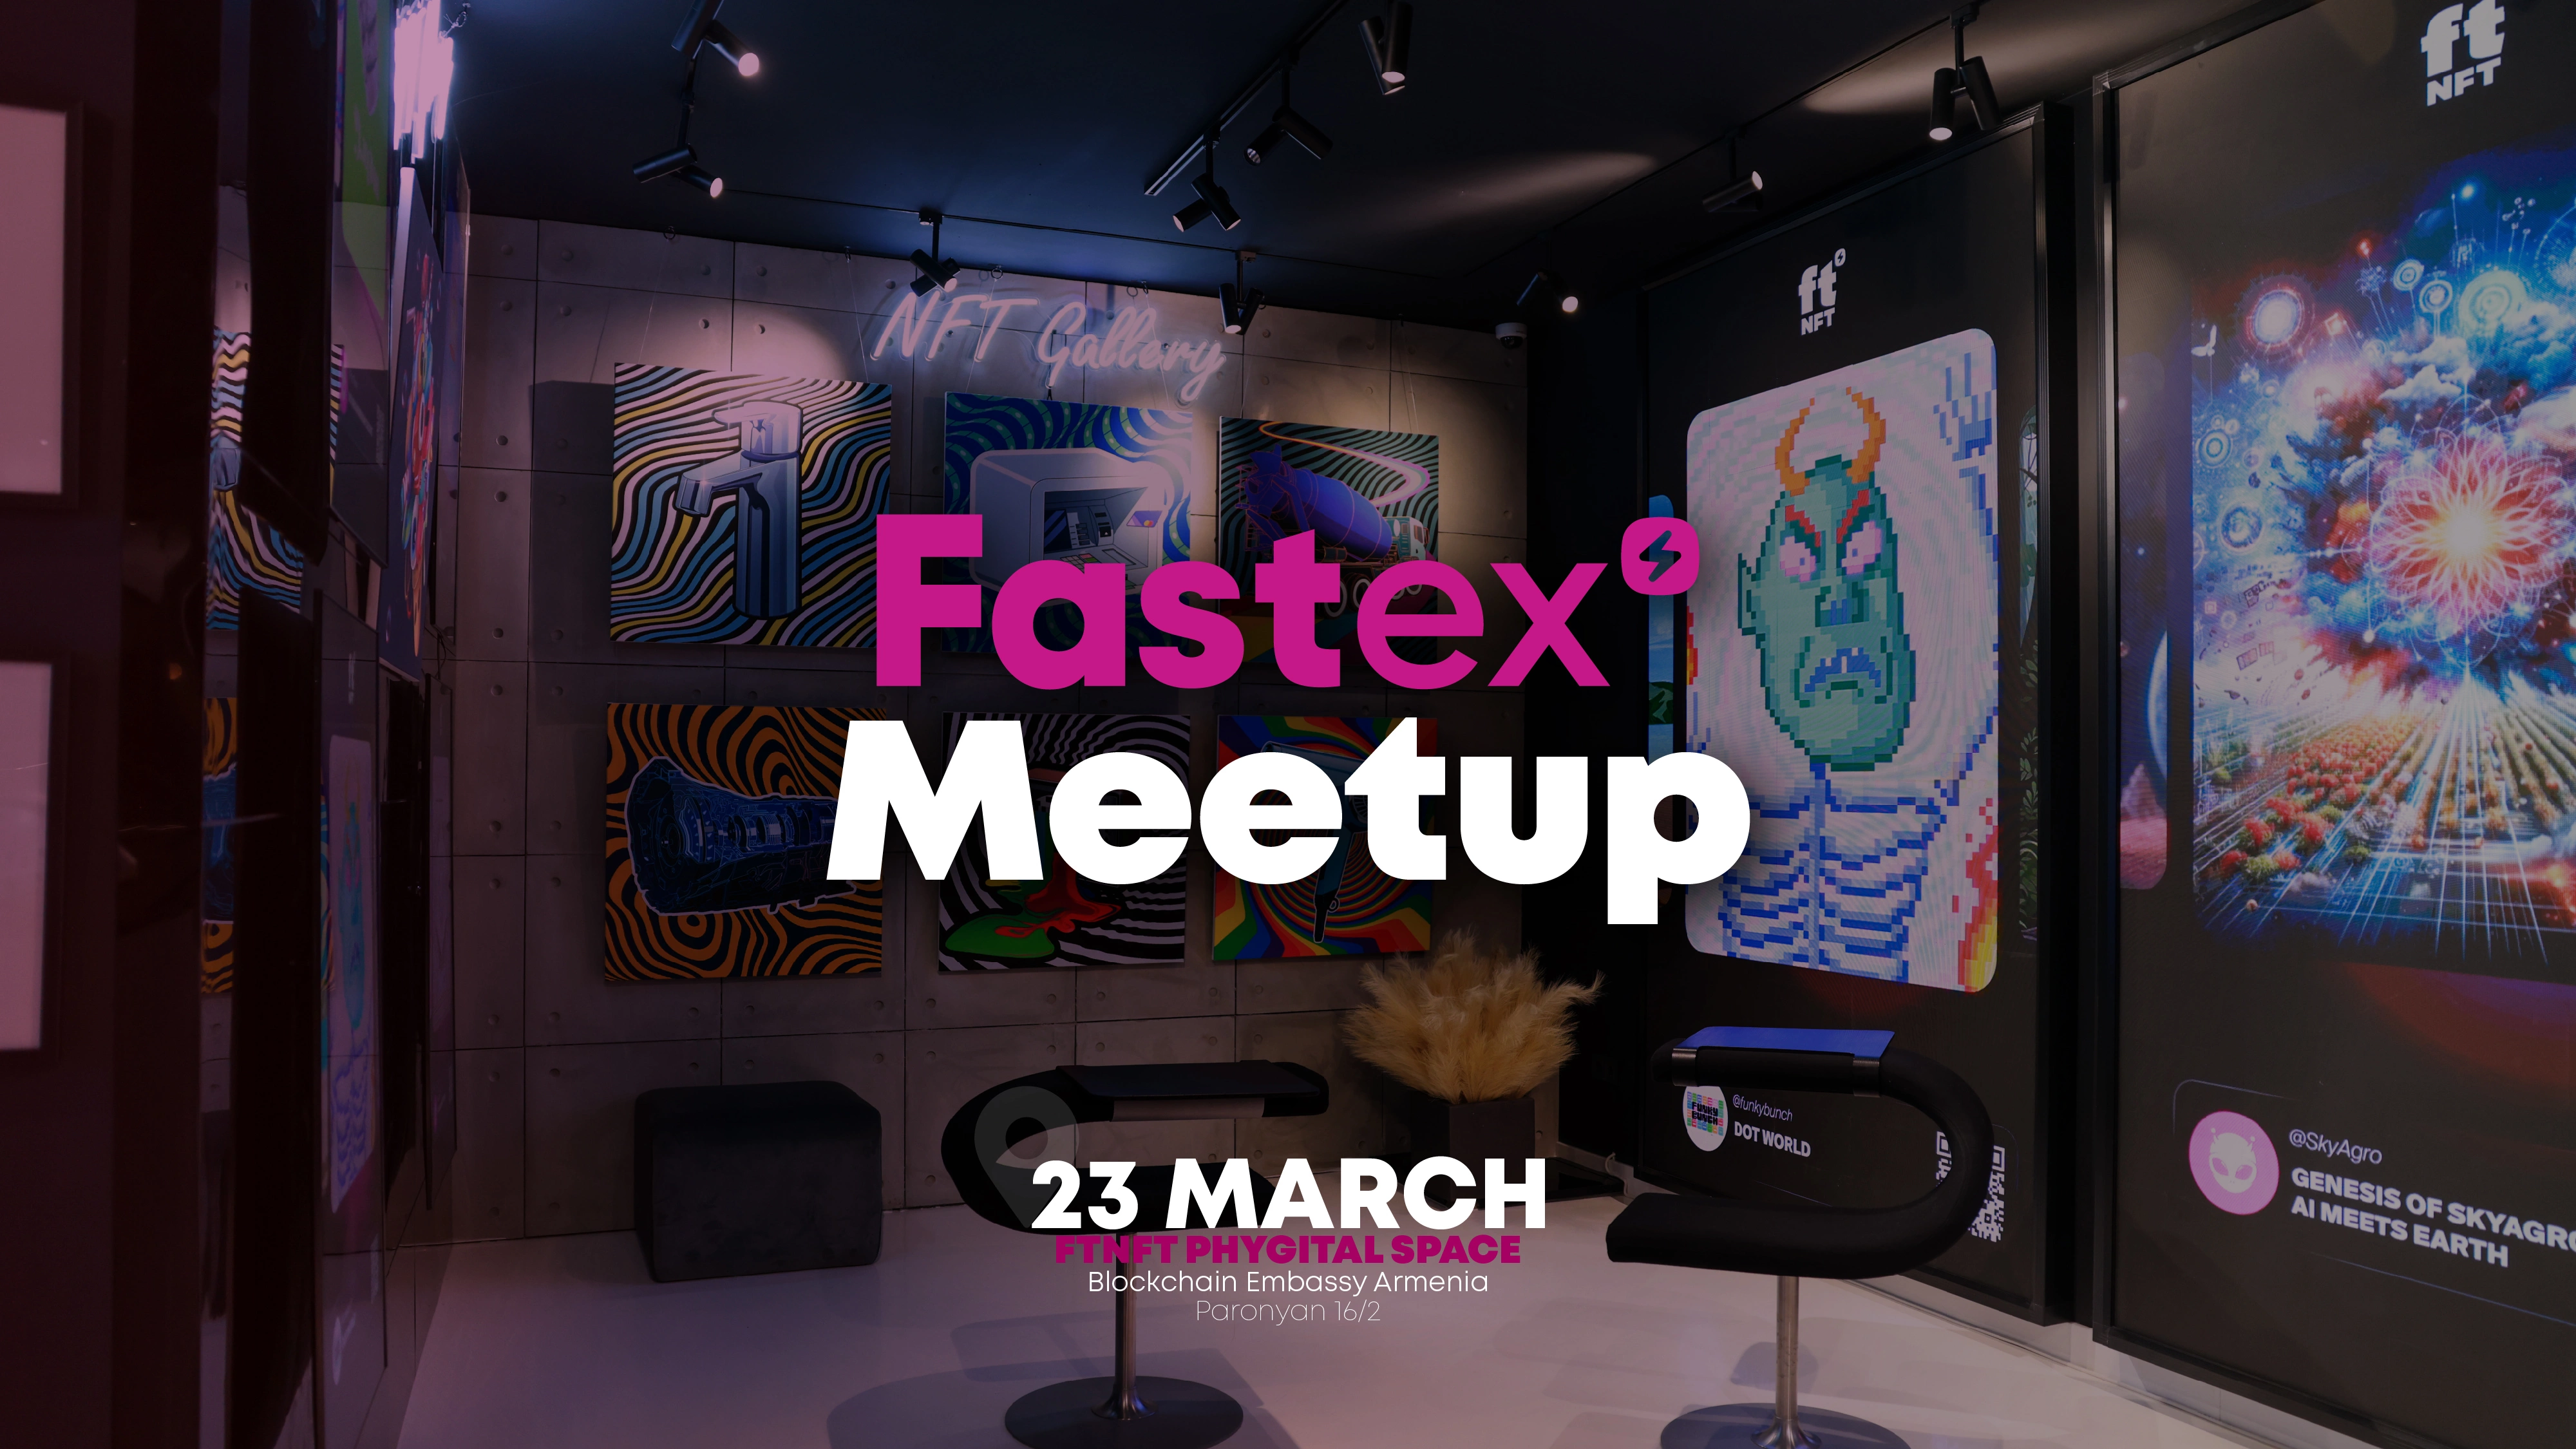 Fastex continues the series of Web3-related meetups at the Blockchain Embassy of Armenia